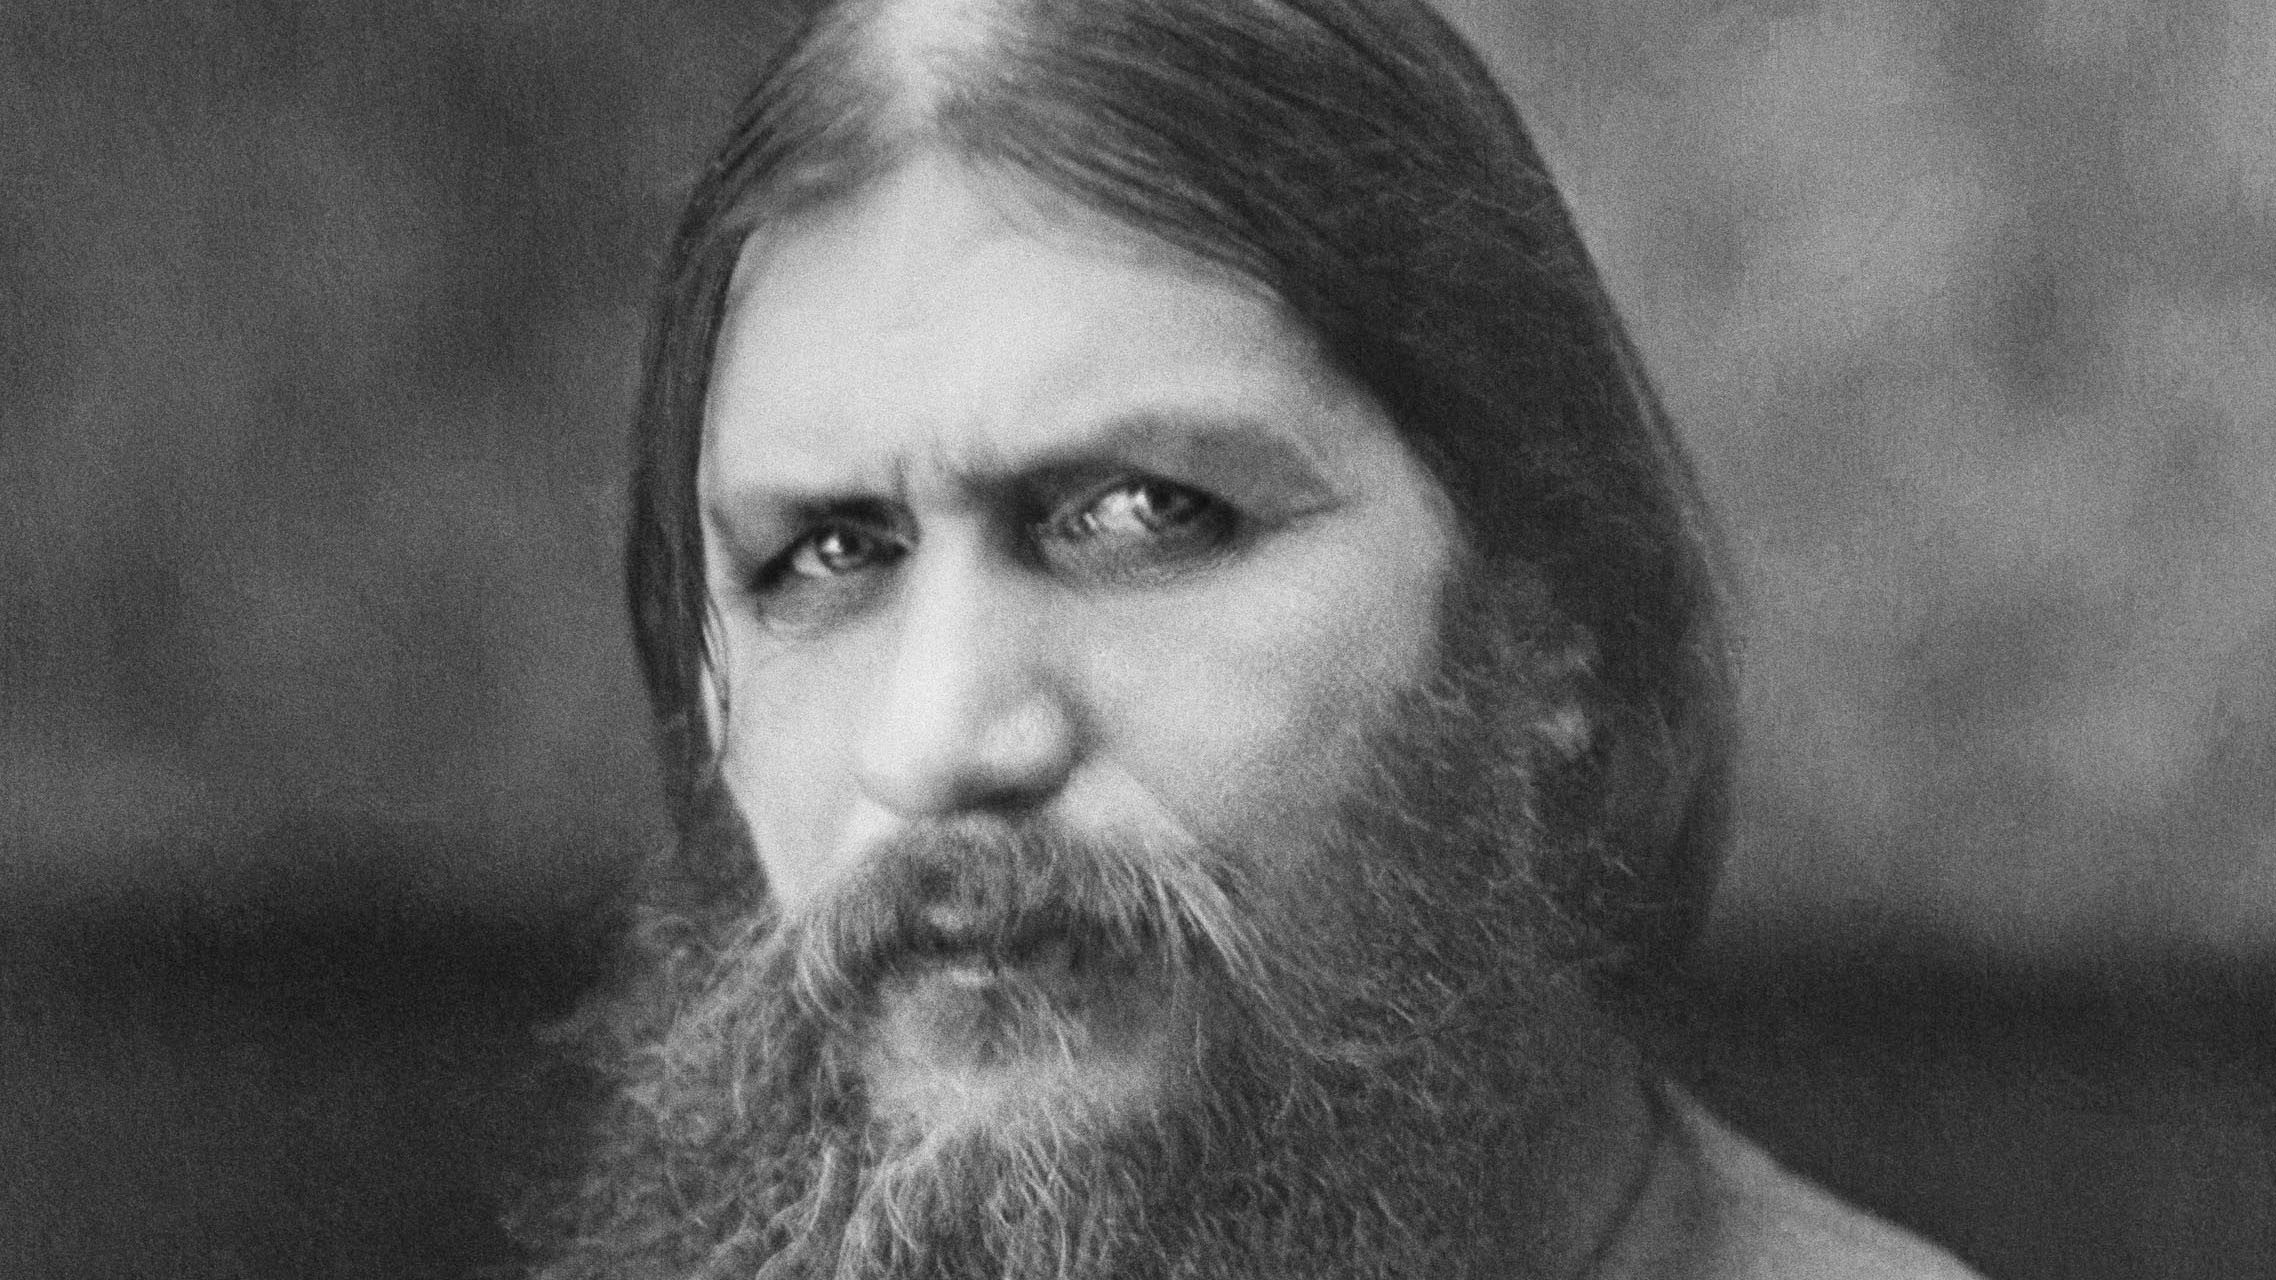 A portrait of Rasputin looking intently at the viewer.